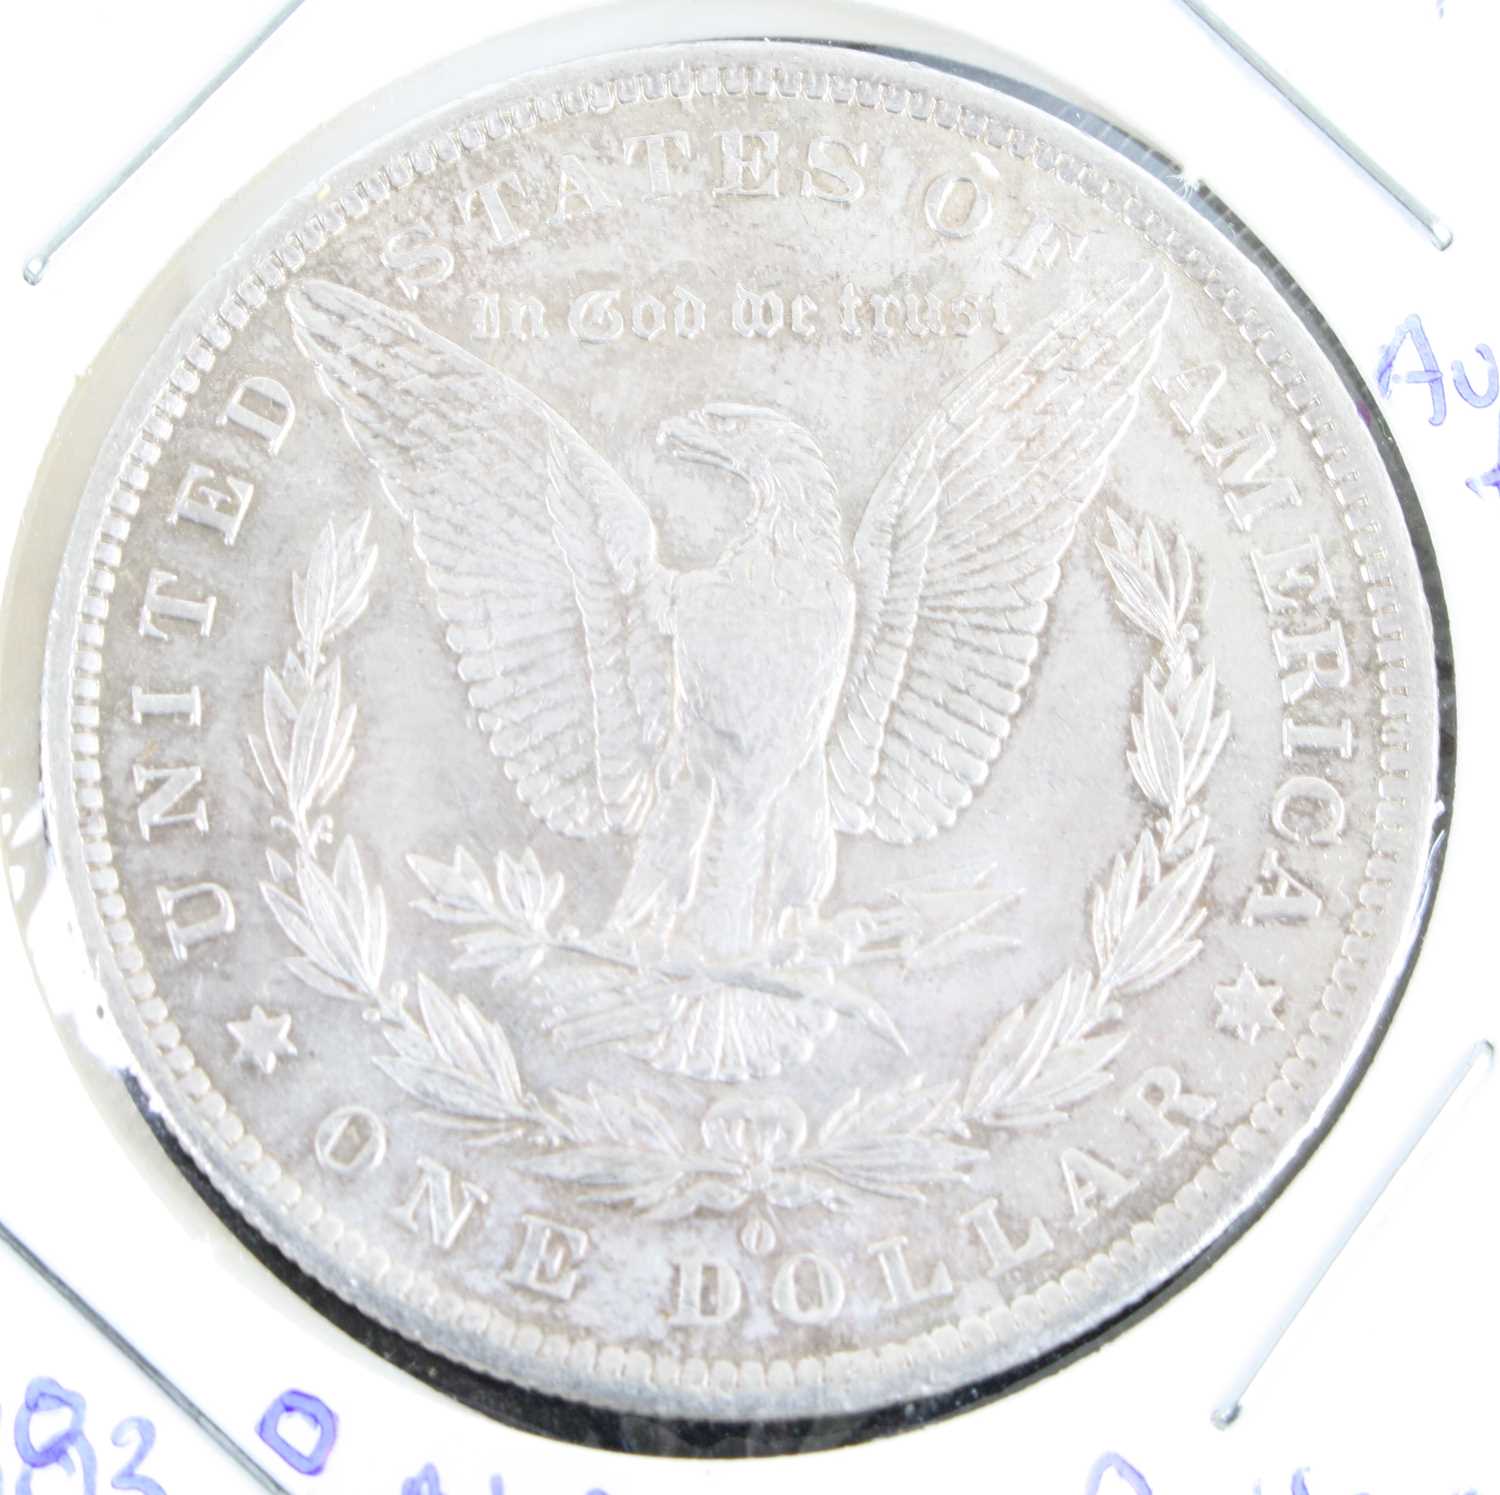 United States of America, 1881 Morgan dollar, obv: Liberty bust left above date, rev: eagle - Image 4 of 7